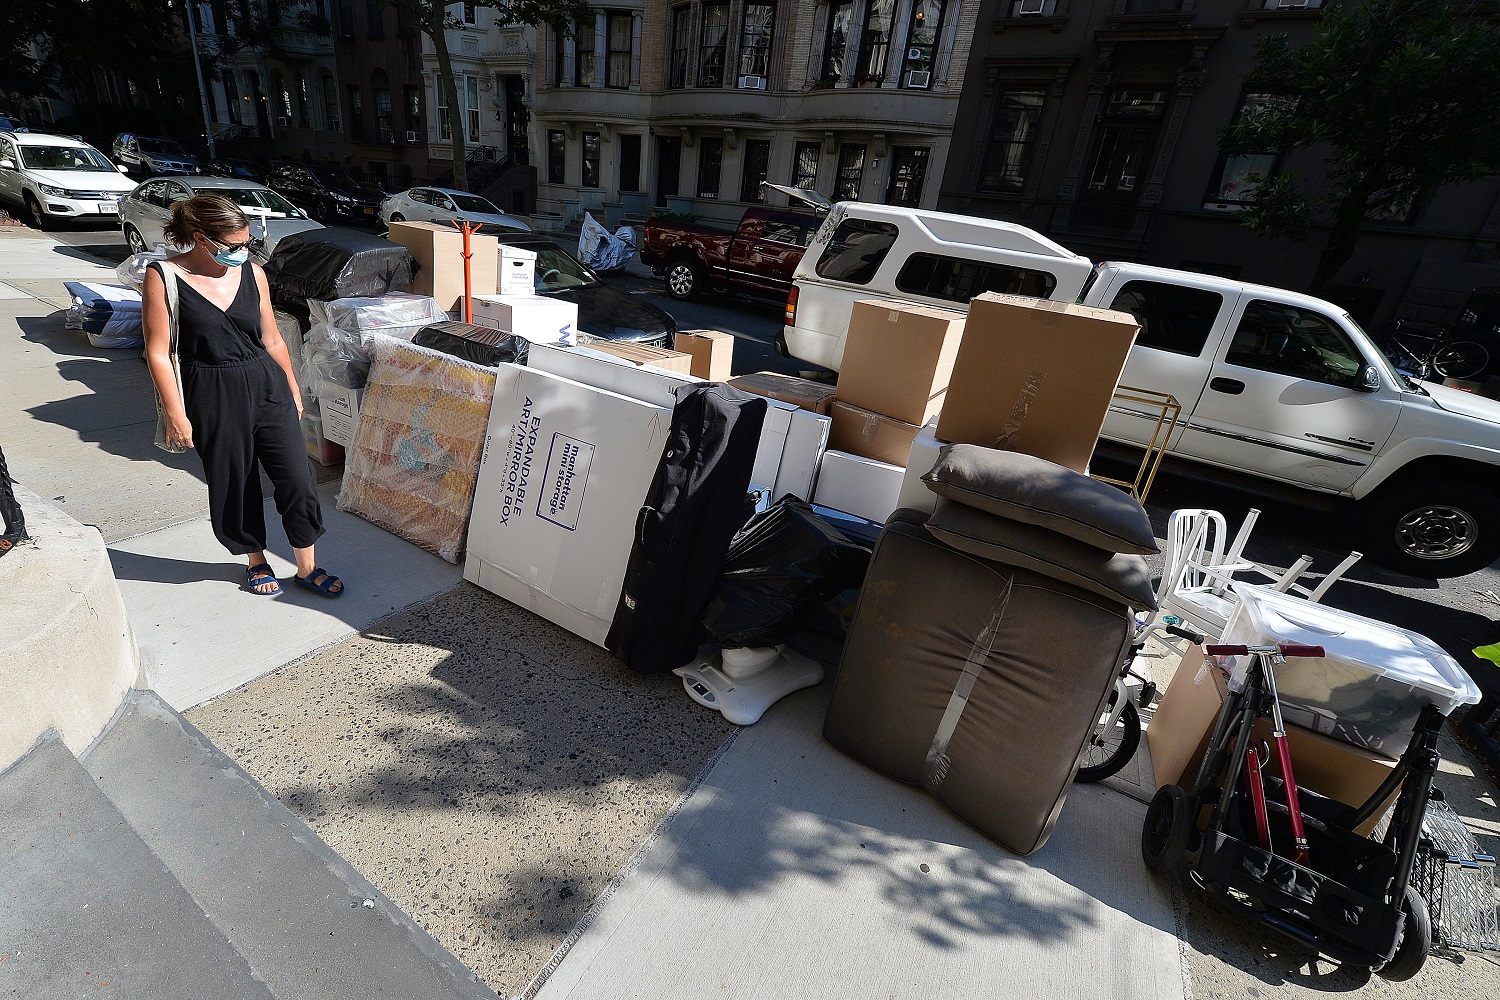 A woman wearing a mask in the time of COVID-19, walks past Moving boxes stacked in front of an Upper West Side brownstone, waiting for movers to finish packing the belongings of former tenants that have already relocated out of state, New York, NY, July 13, 2020. Complicated by the economic impact of the COVID-19 pandemic, months of shelter in place, daily protests, social clashes and and the slow reopening of the economy, have forced many New Yorkers to leave a city where rents are high and future job opportunities are difficult to predict. (Anthony Behar/Sipa USA)No Use UK. No Use Germany.